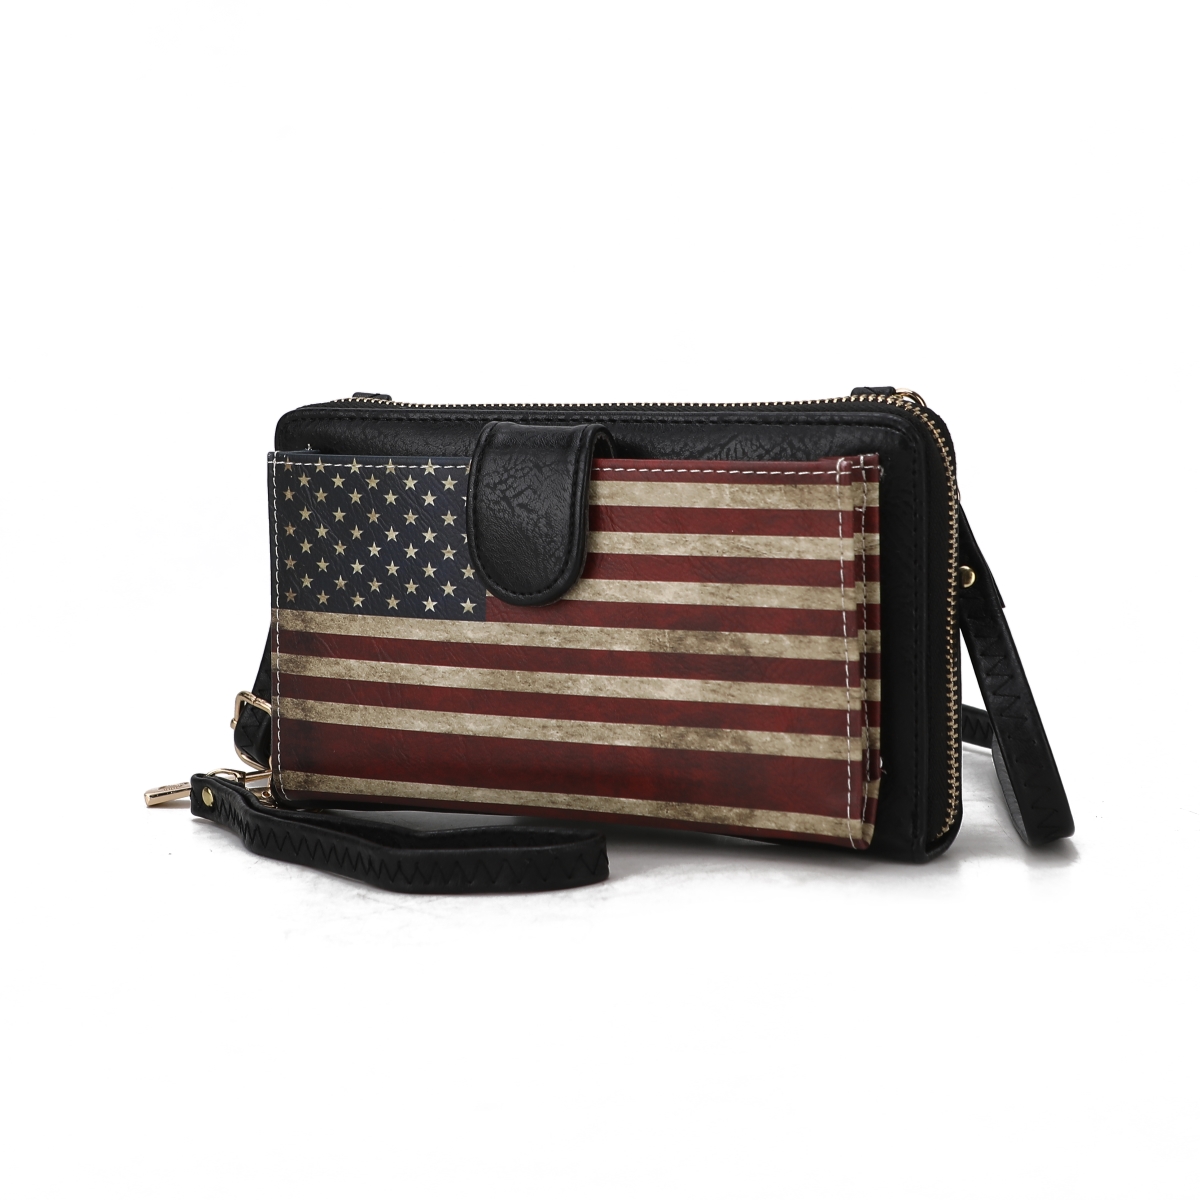 Picture of MKF Collection by Mia K. MKF-FG7406BK Kiara Smartphone and Wallet Convertible FLAG Crossbody Bag